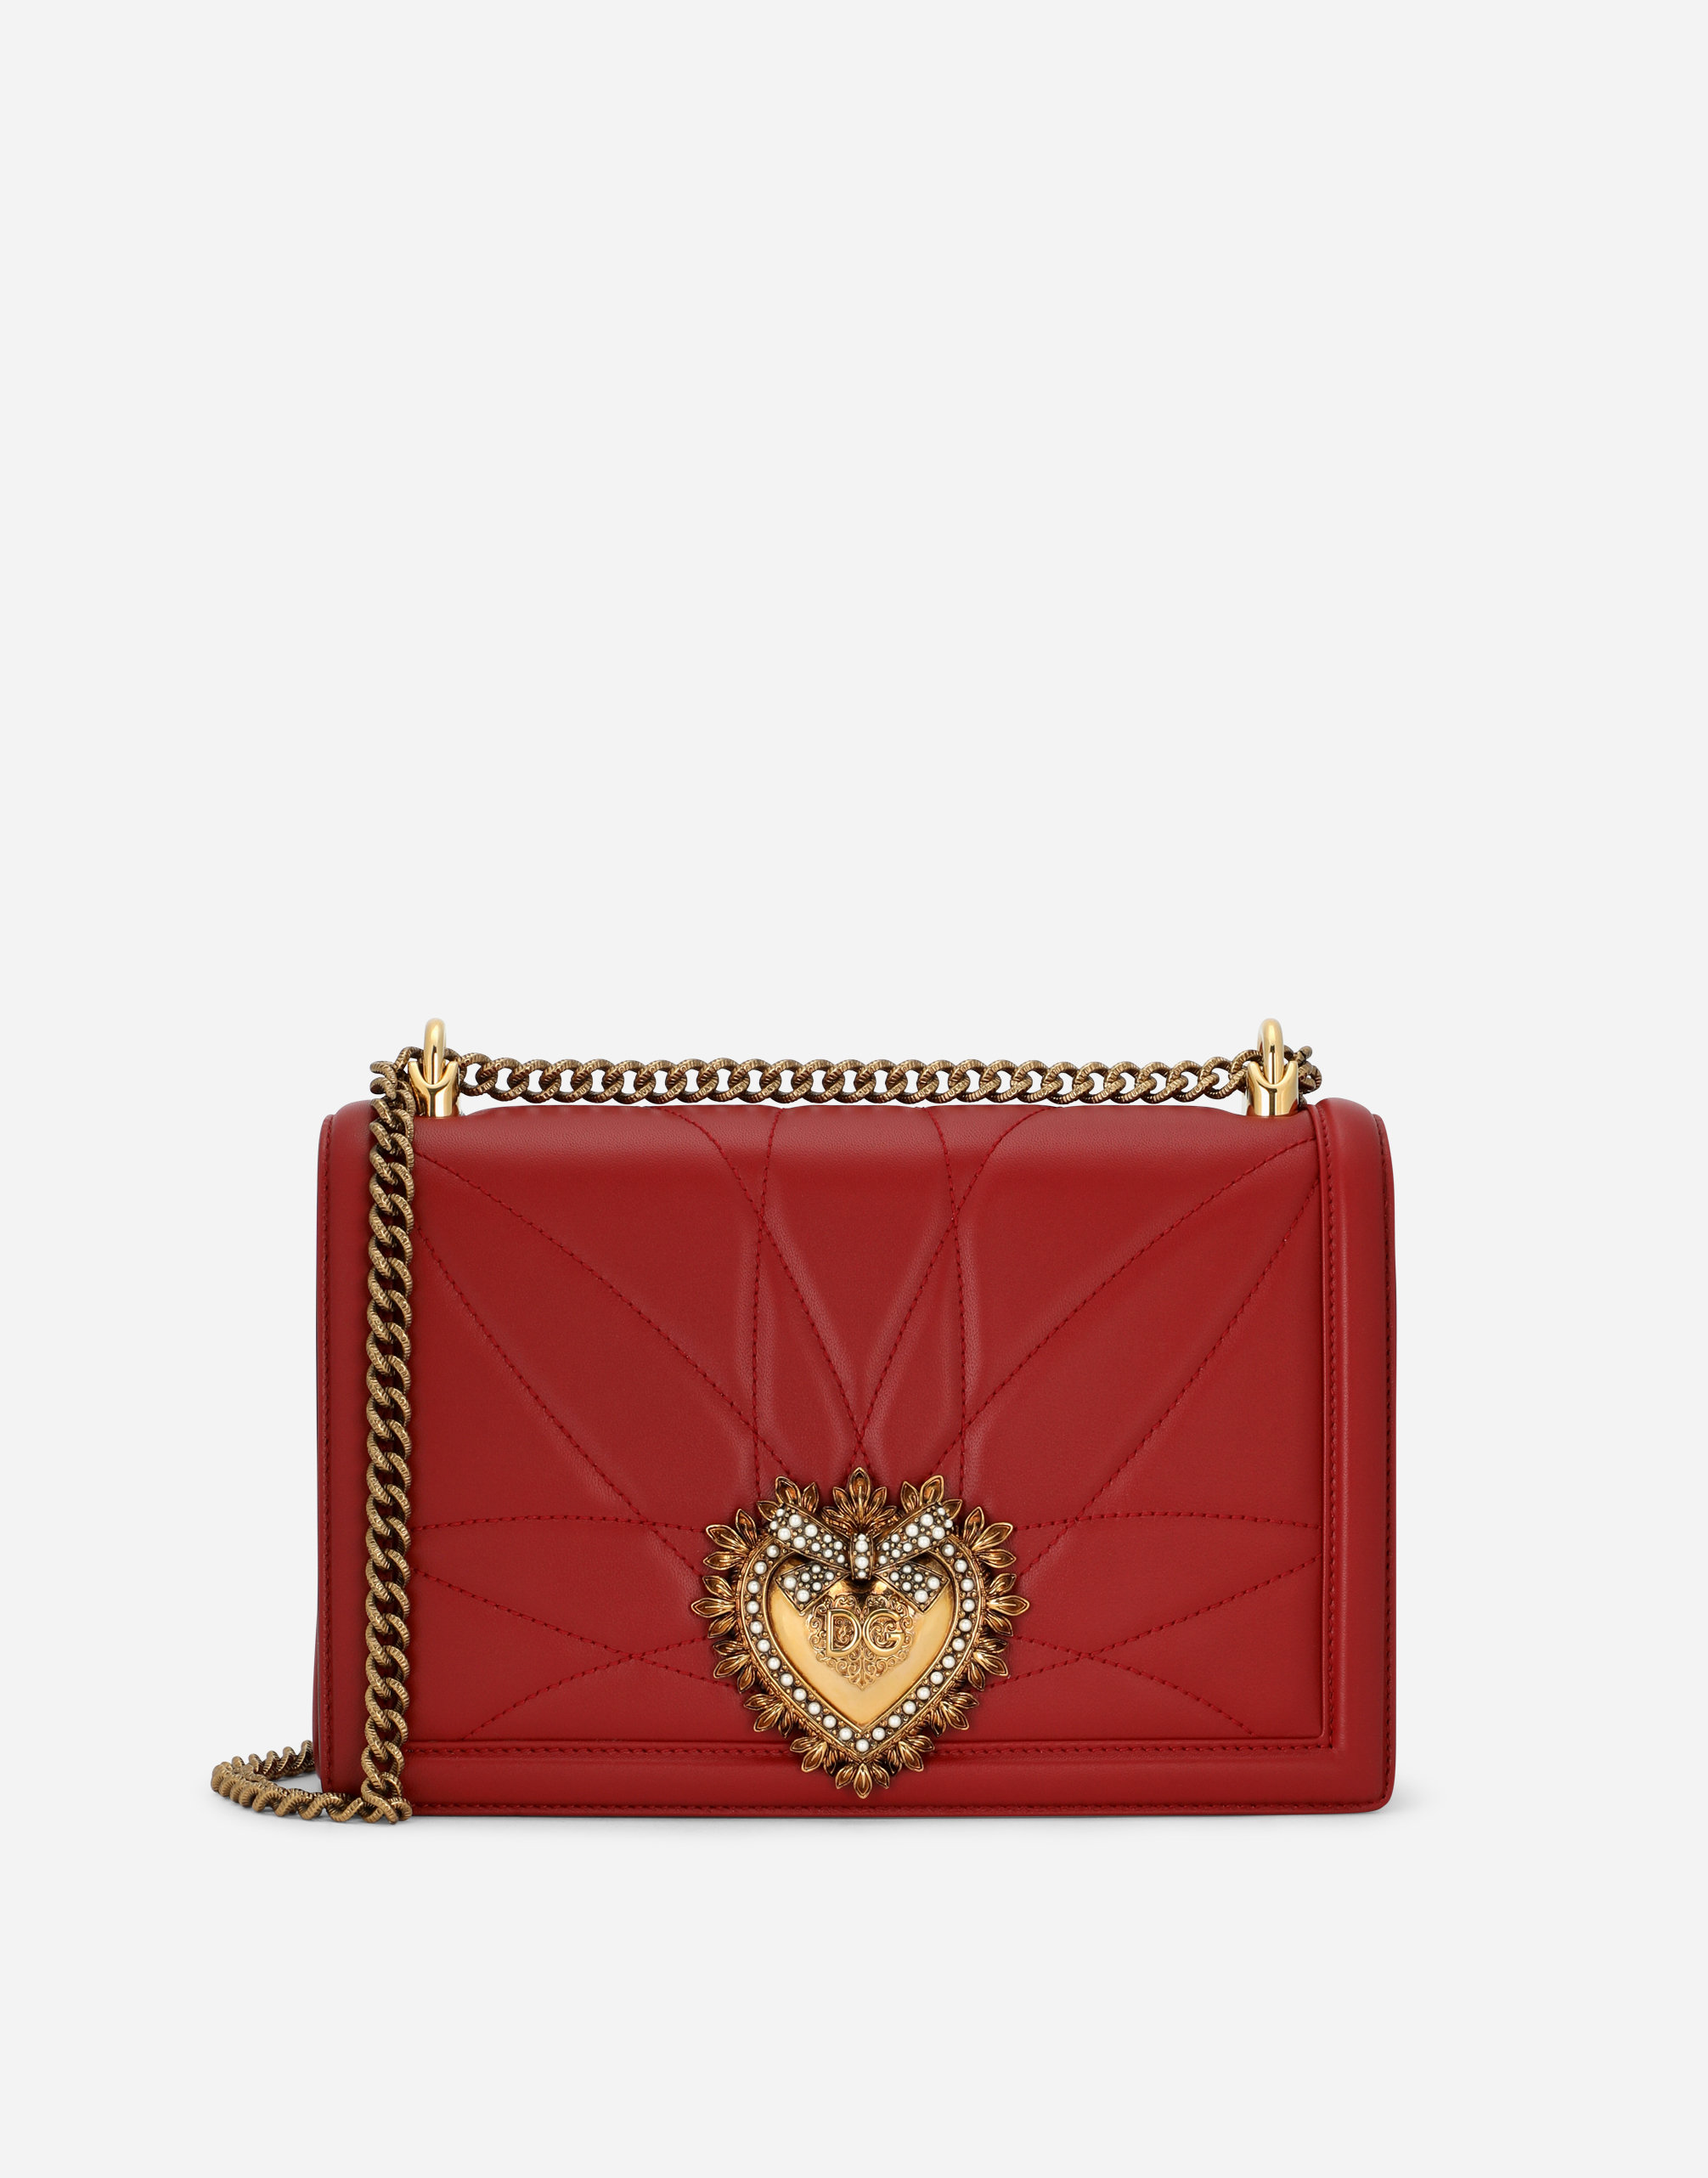 Dolce & Gabbana Large Devotion Bag In Quilted Nappa Leather In Red